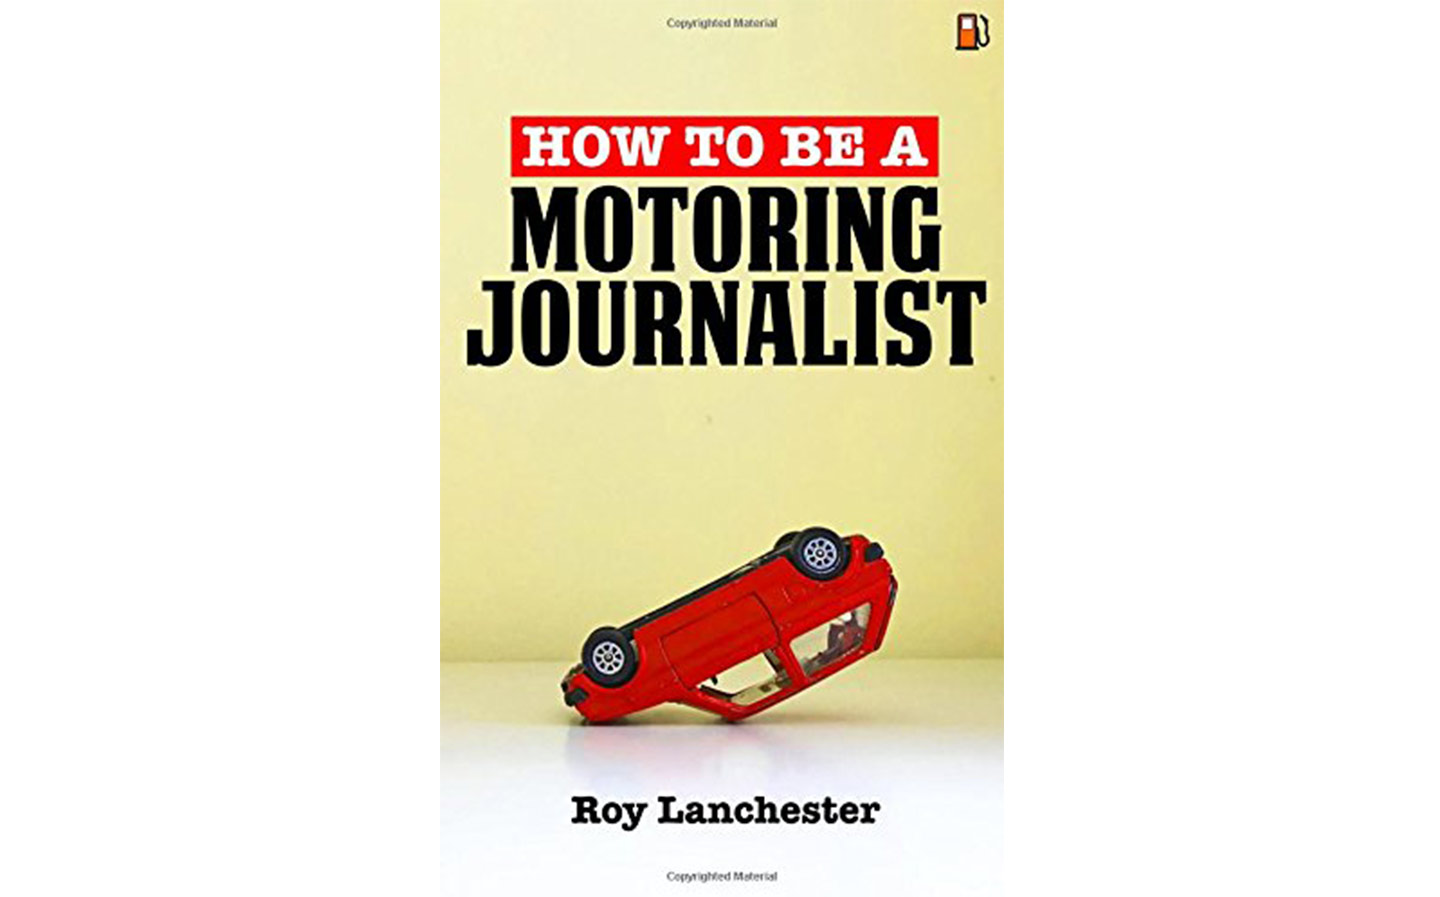 Richard Porter How to be a motoring journalist by Roy Lanchester book